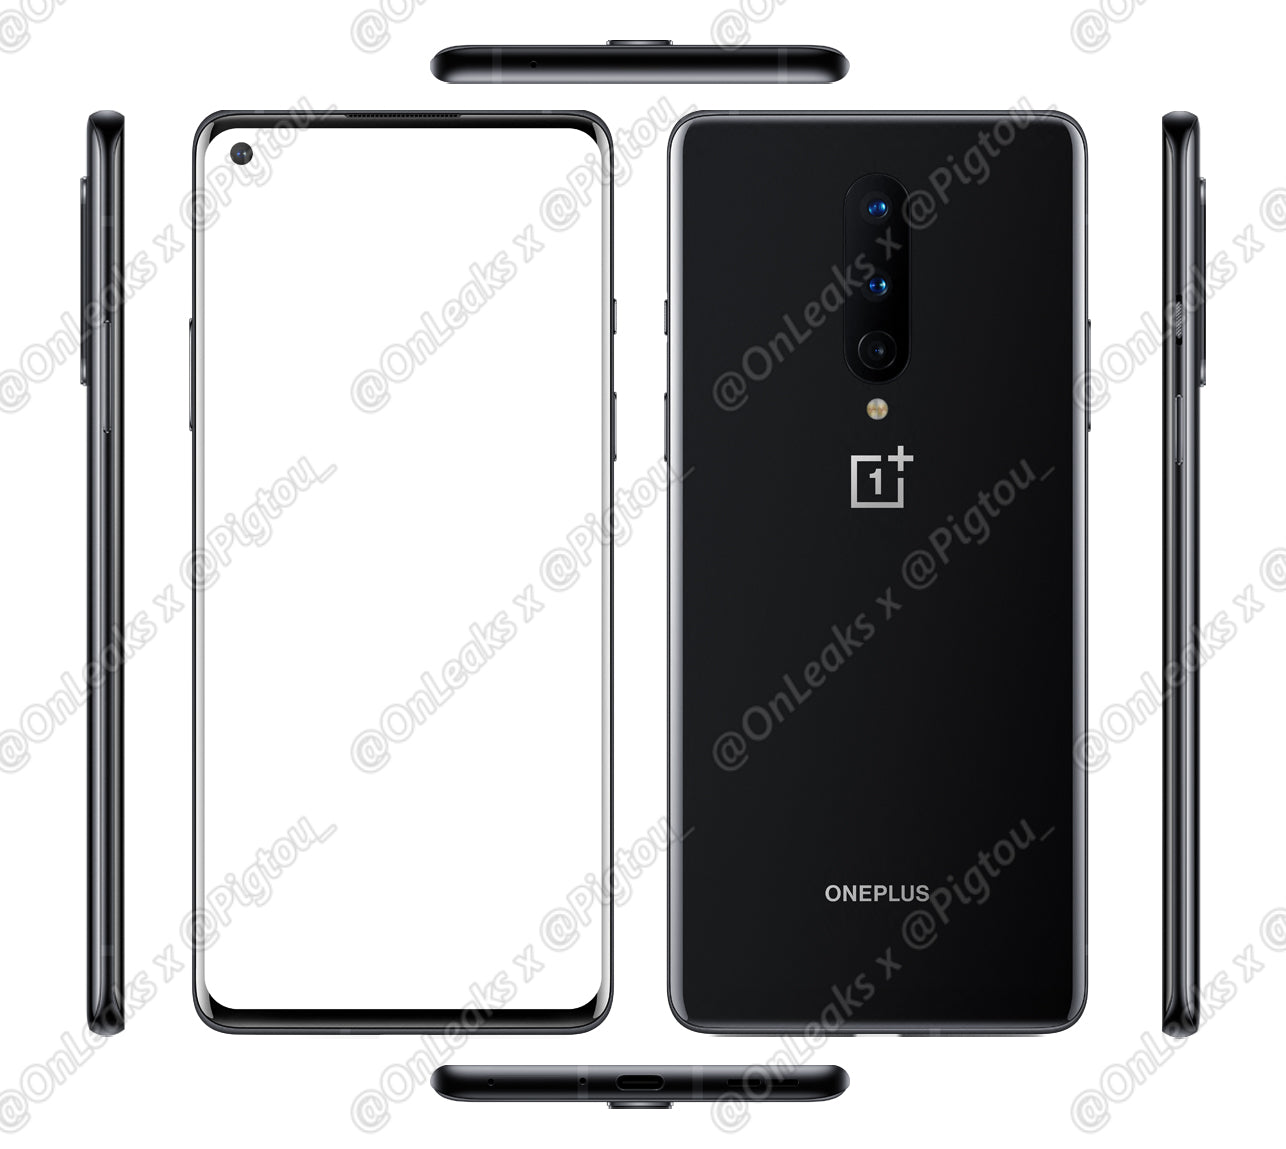 OnePlus 8 Official Press render by Pigtou